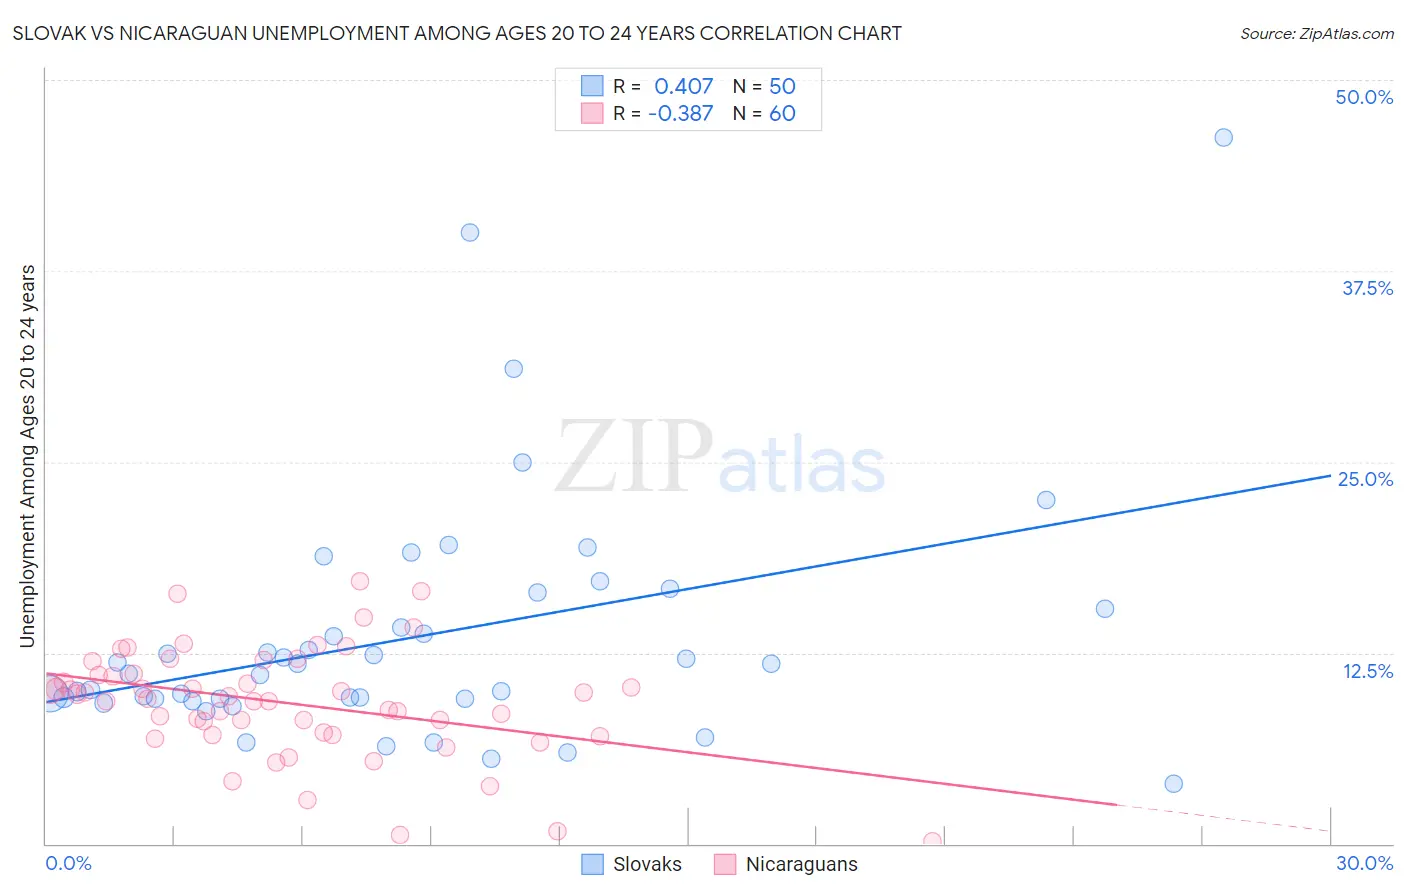 Slovak vs Nicaraguan Unemployment Among Ages 20 to 24 years